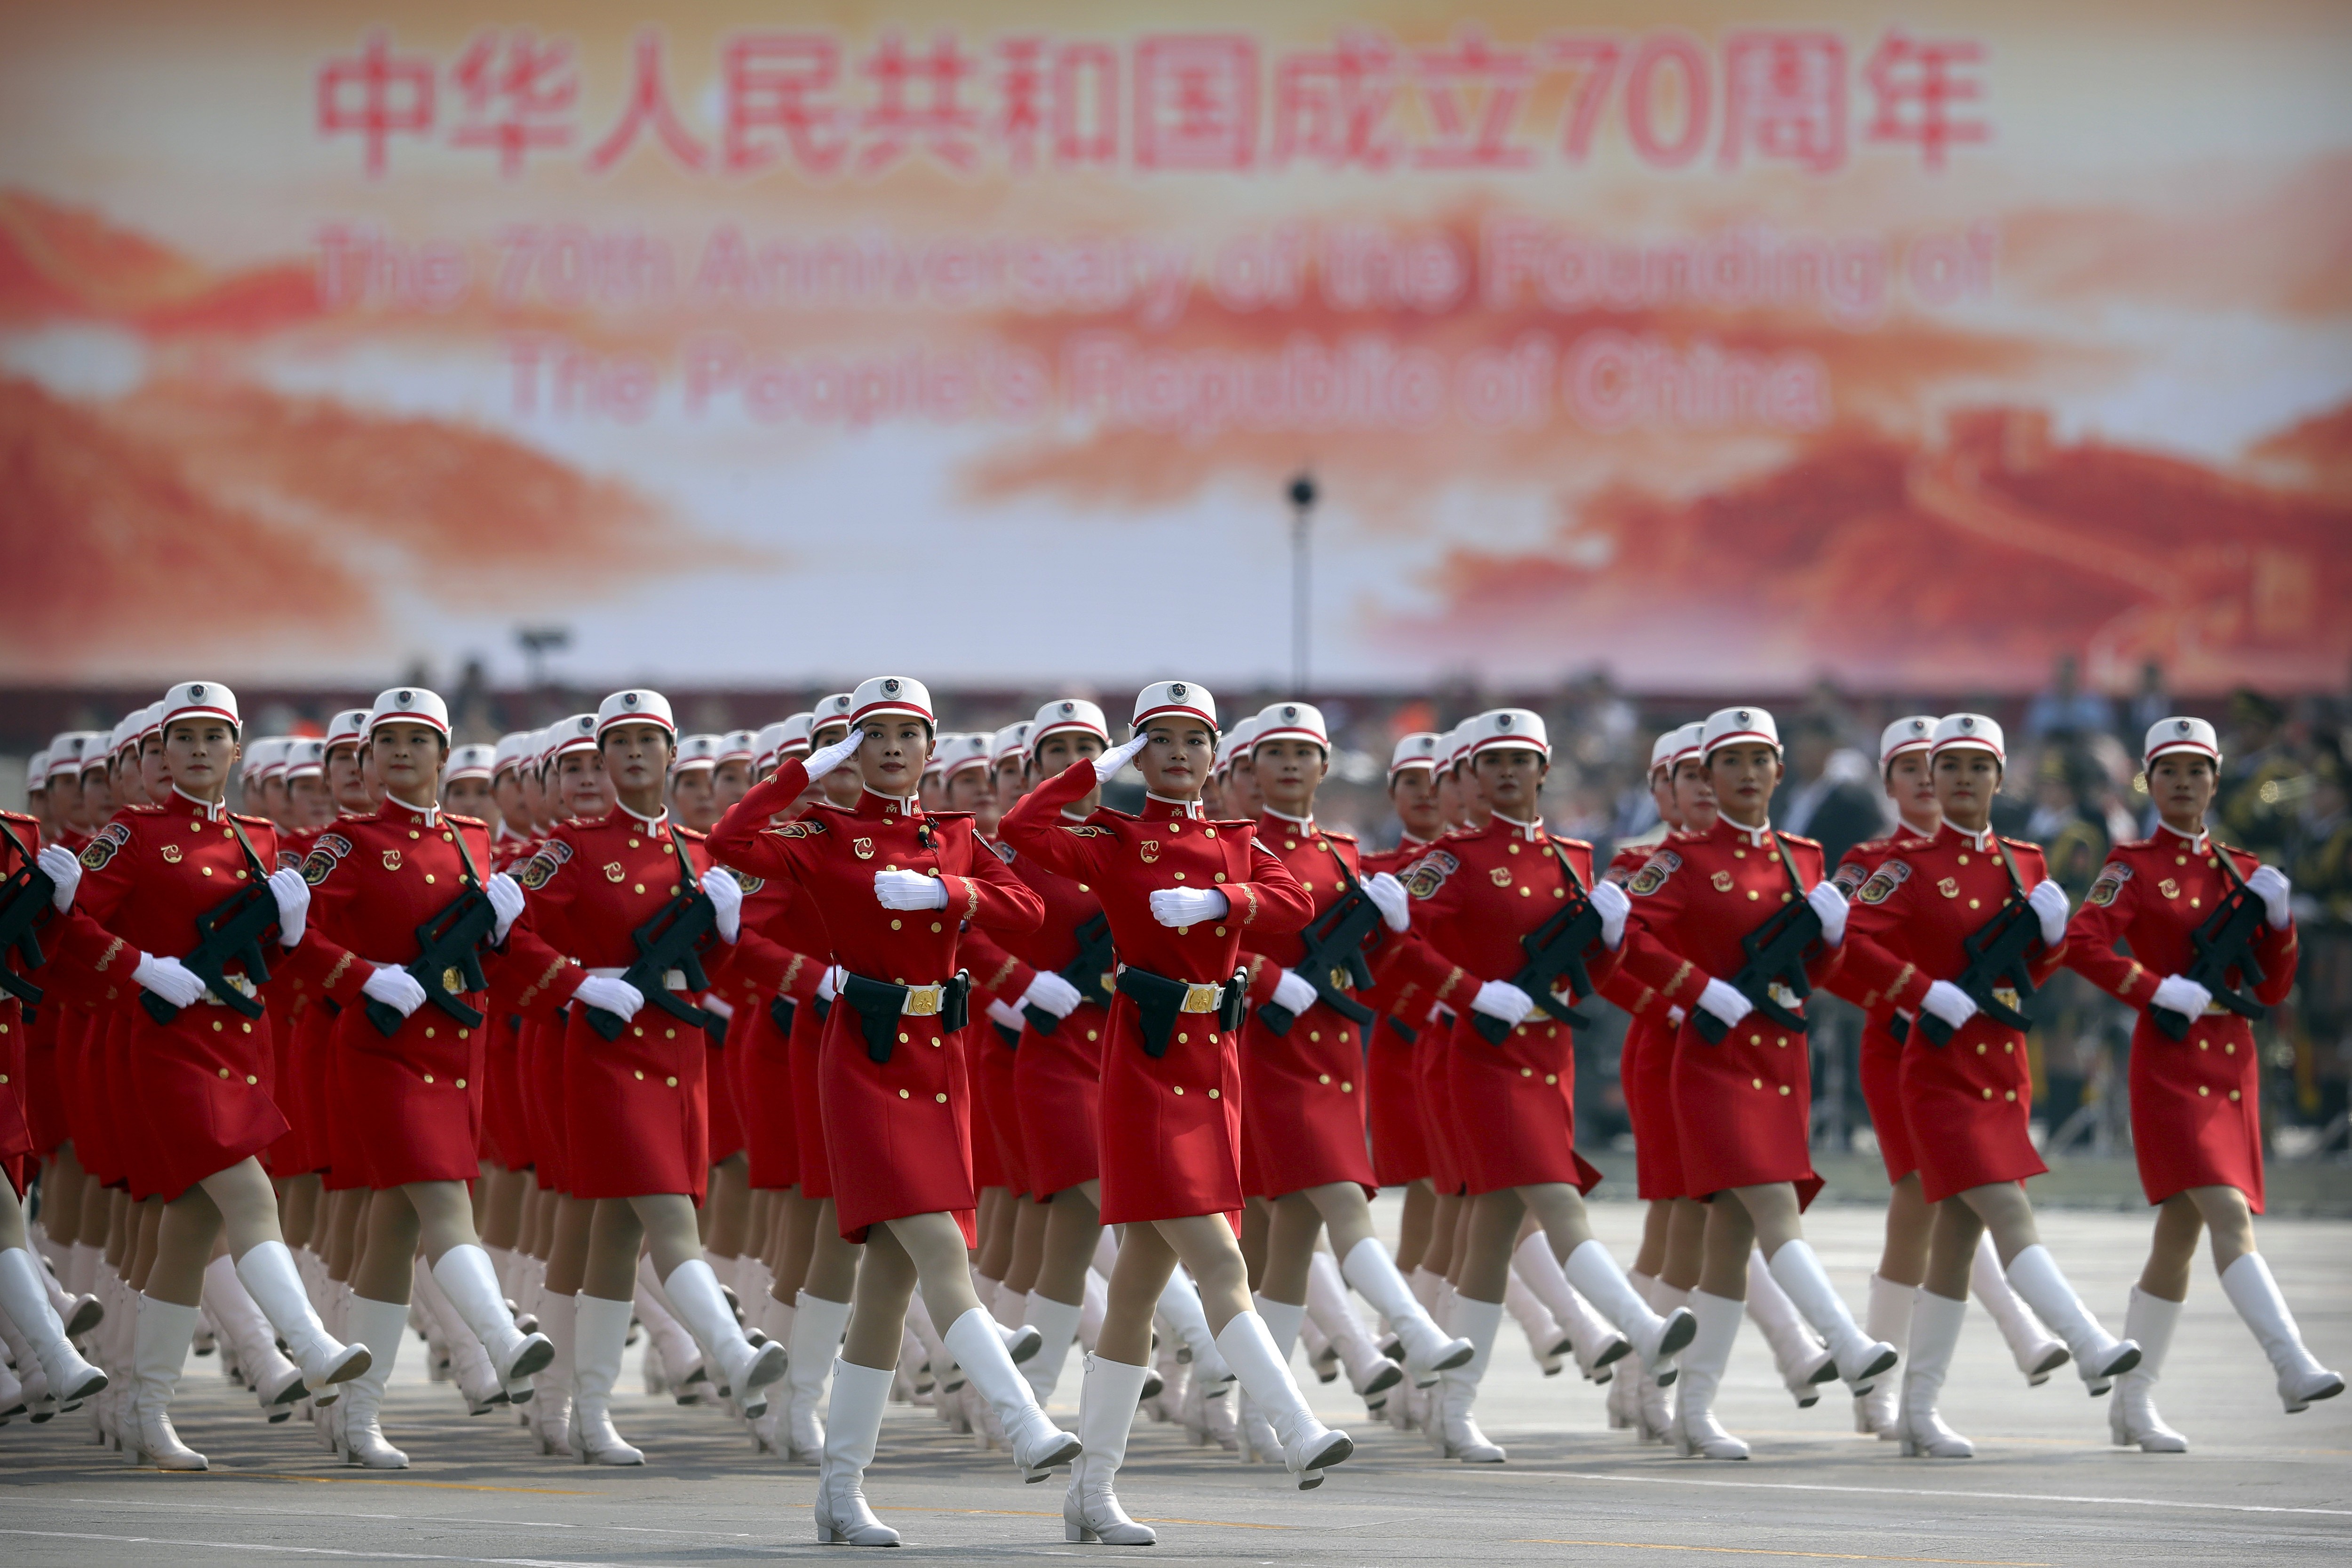 Women soldiers from the People’s Liberation Army add more colour to the parade. Photo: AP